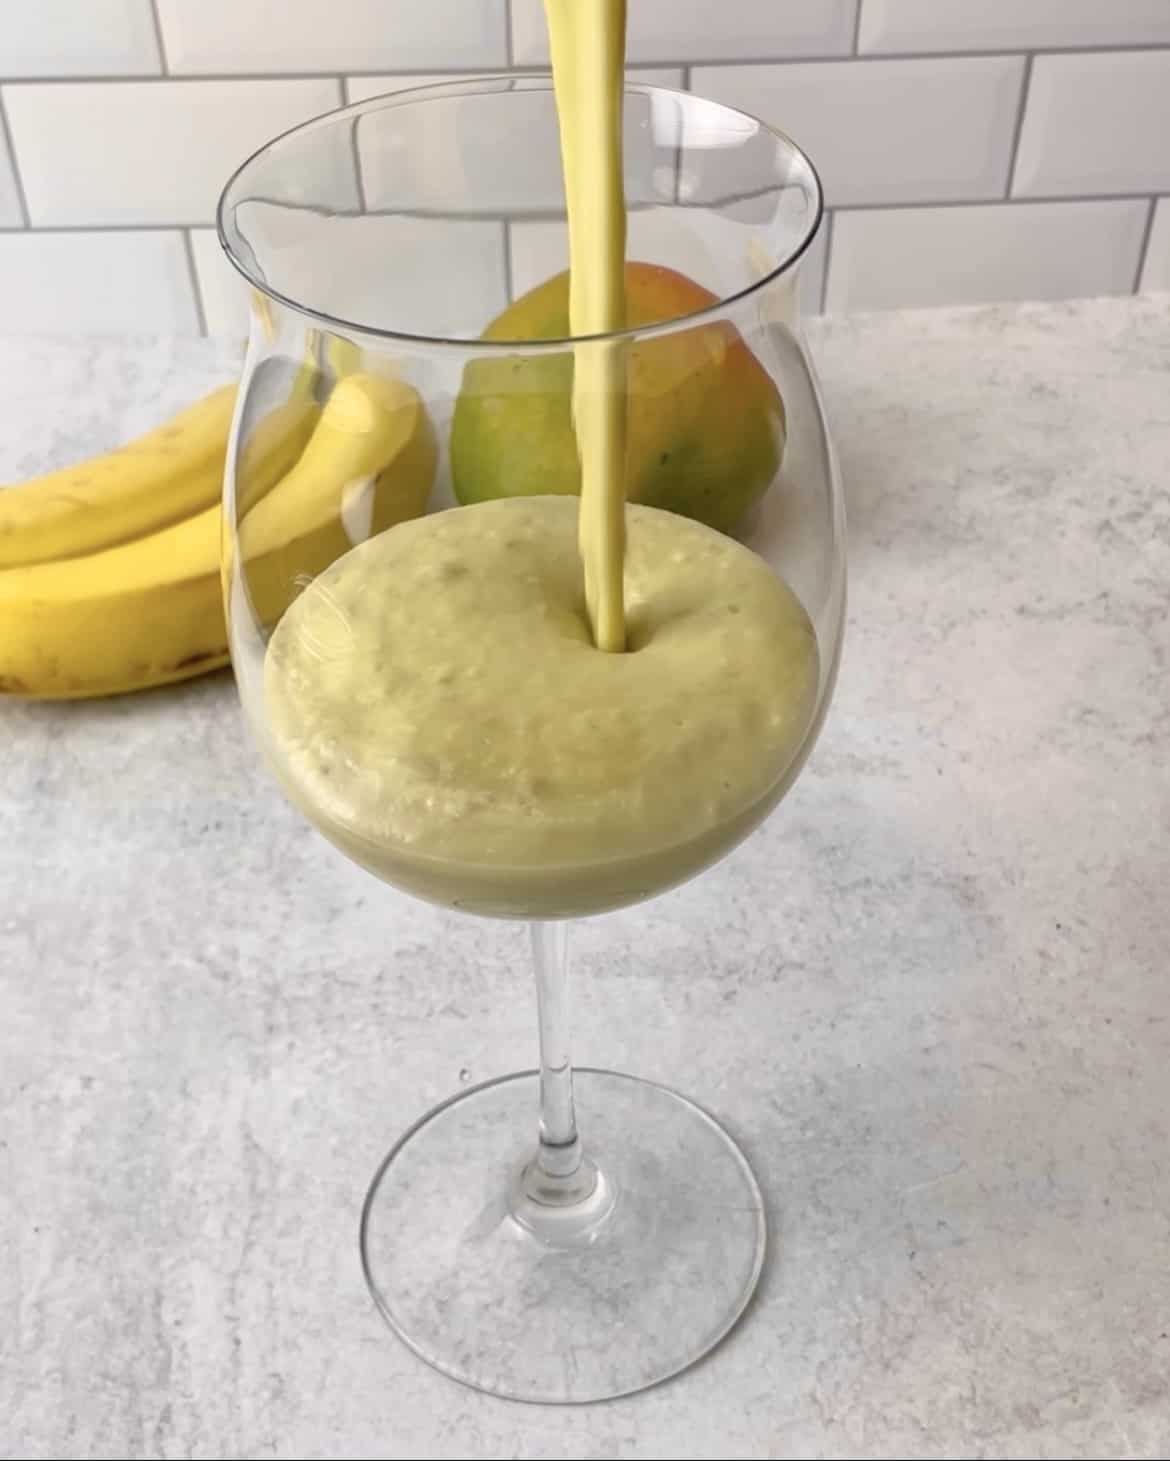 Tasty avocado smoothie being poured into a glass.